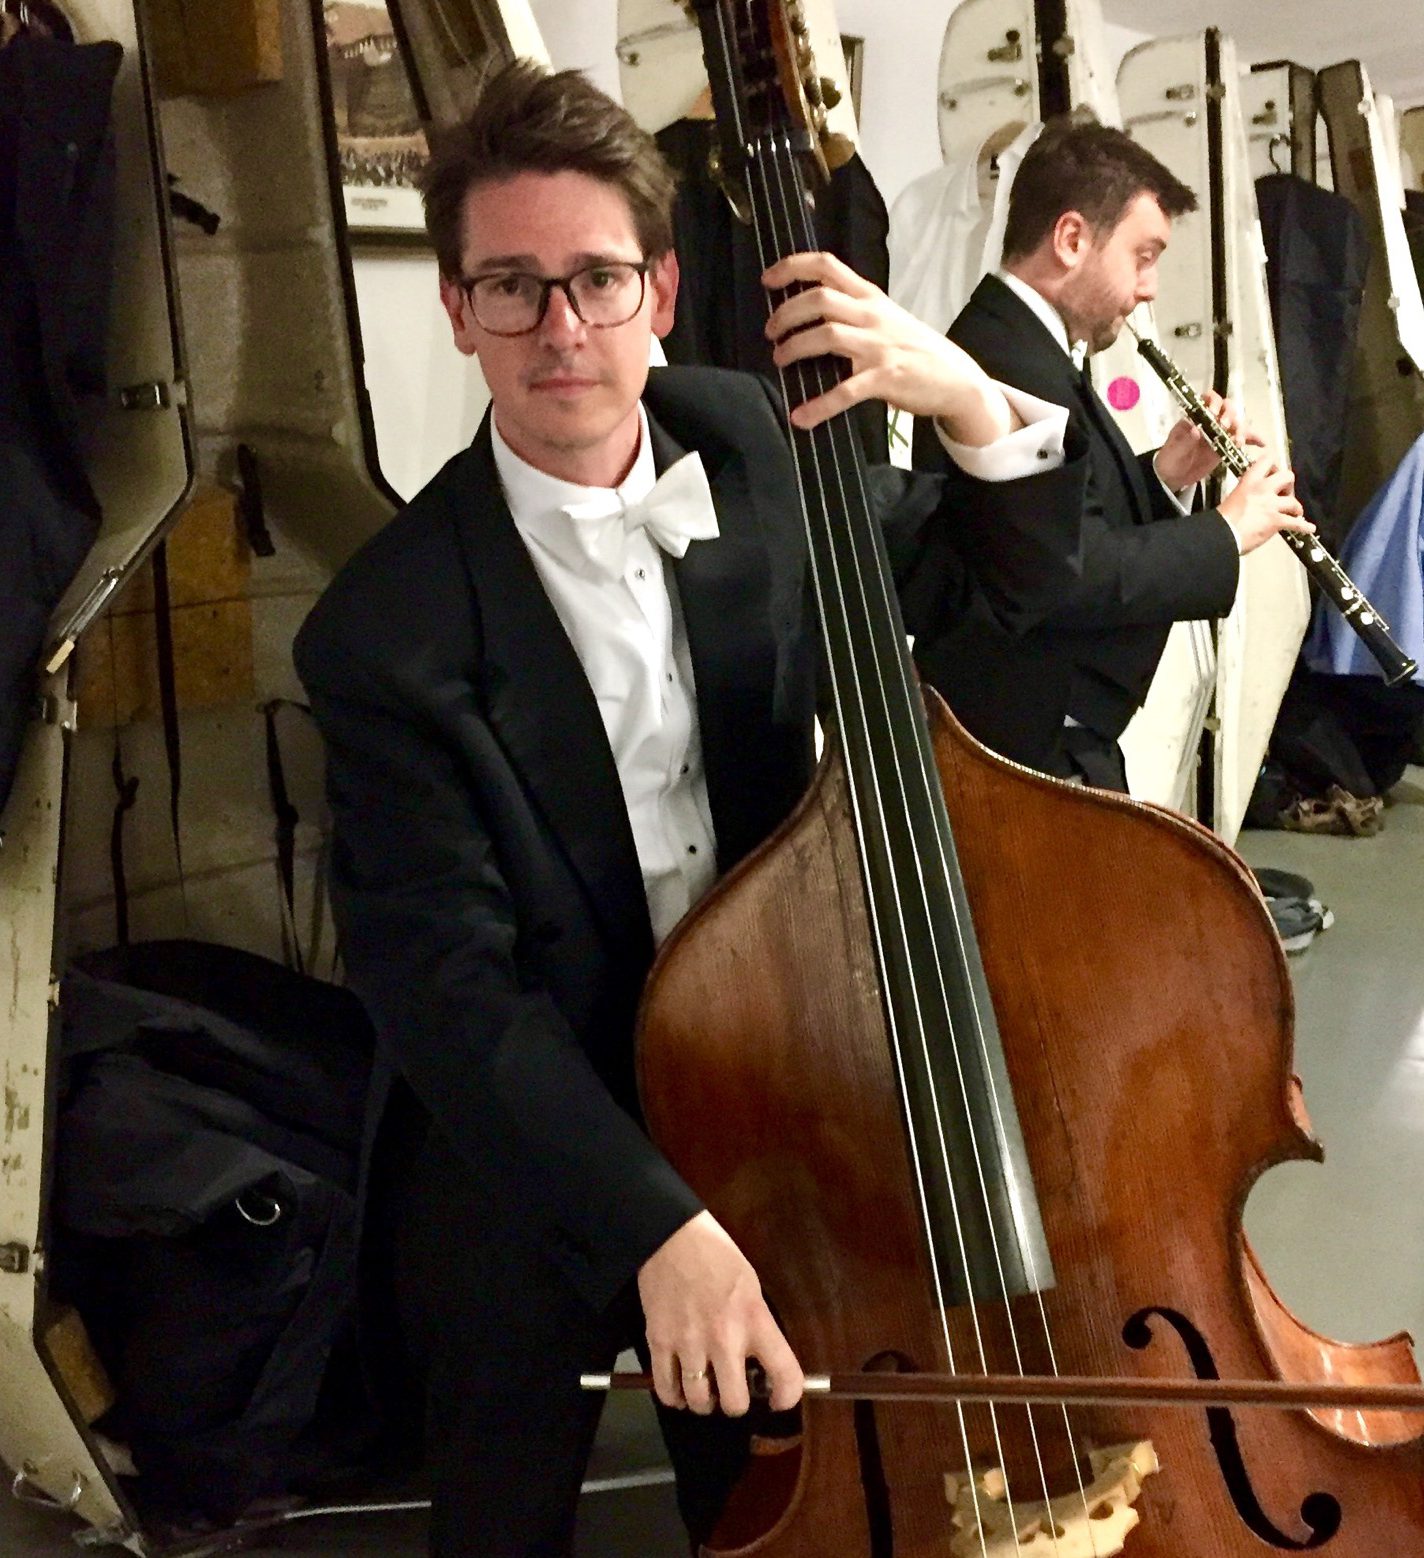 Double bassist and Queensland Conservatorium graduate Jeremy Watt, rehearsing while on tour in China recently